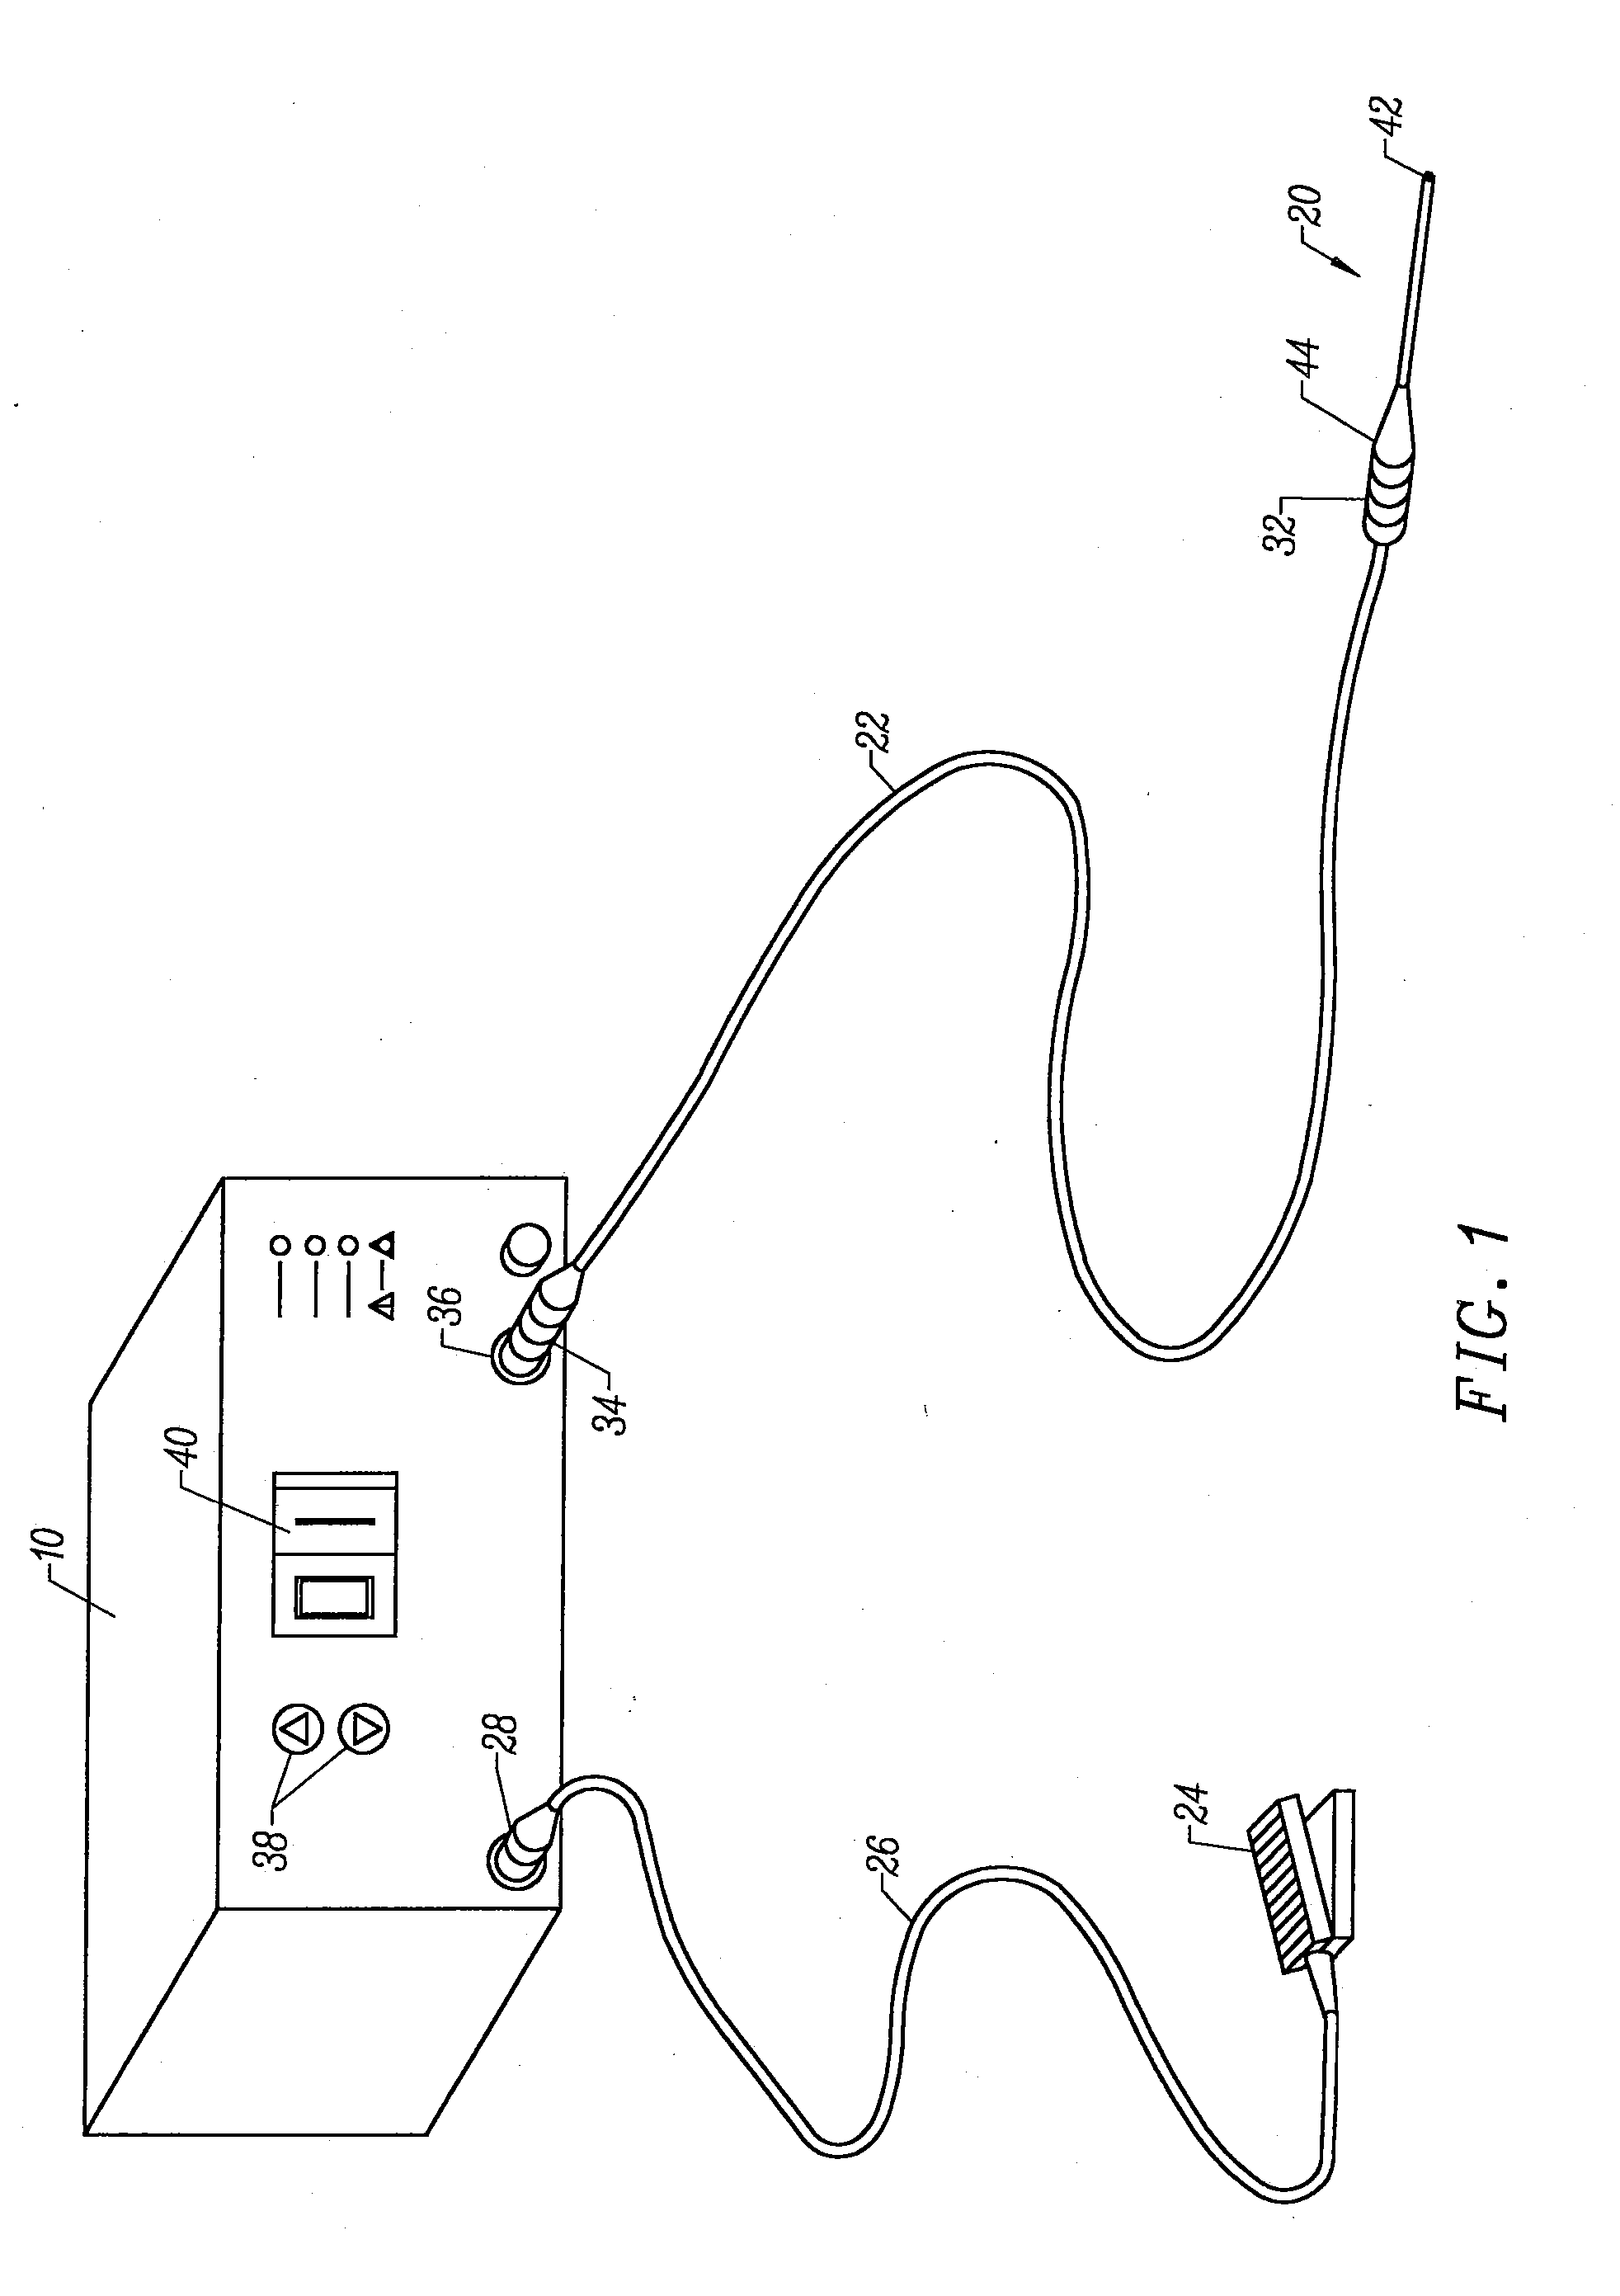 Electrosurgical apparatus and methods for ablating tissue